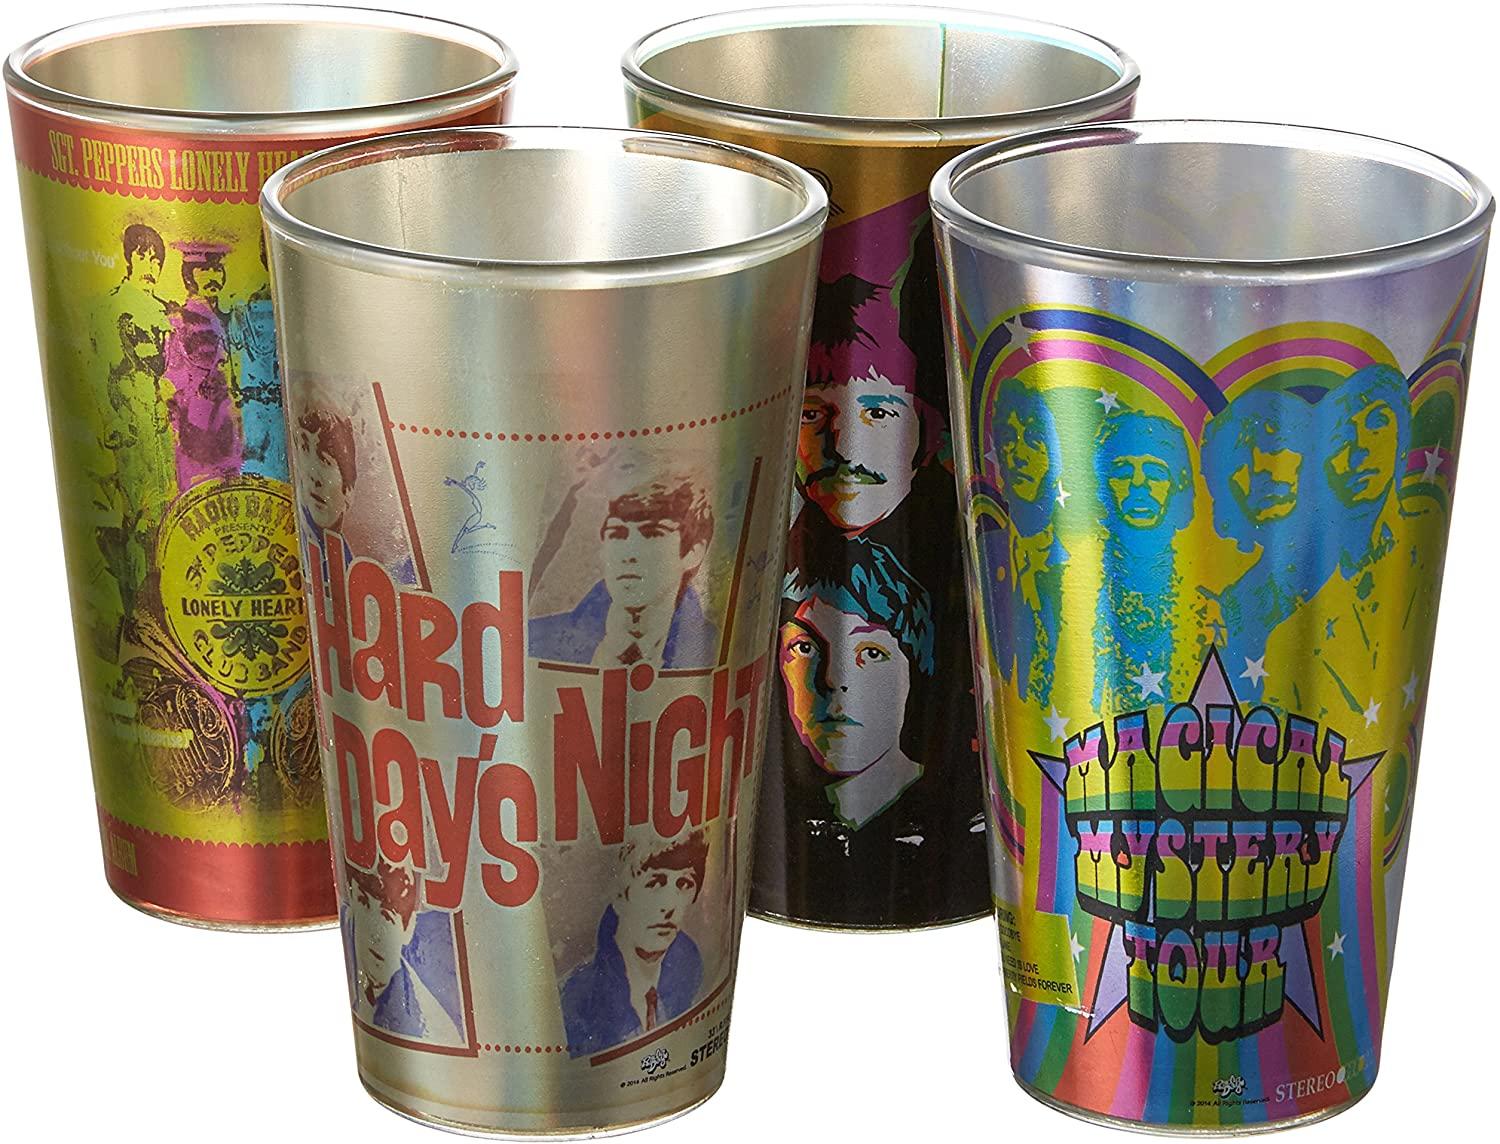 Radio Days Beatles Cd Art 4-Pack Pint Glass by Just Funky